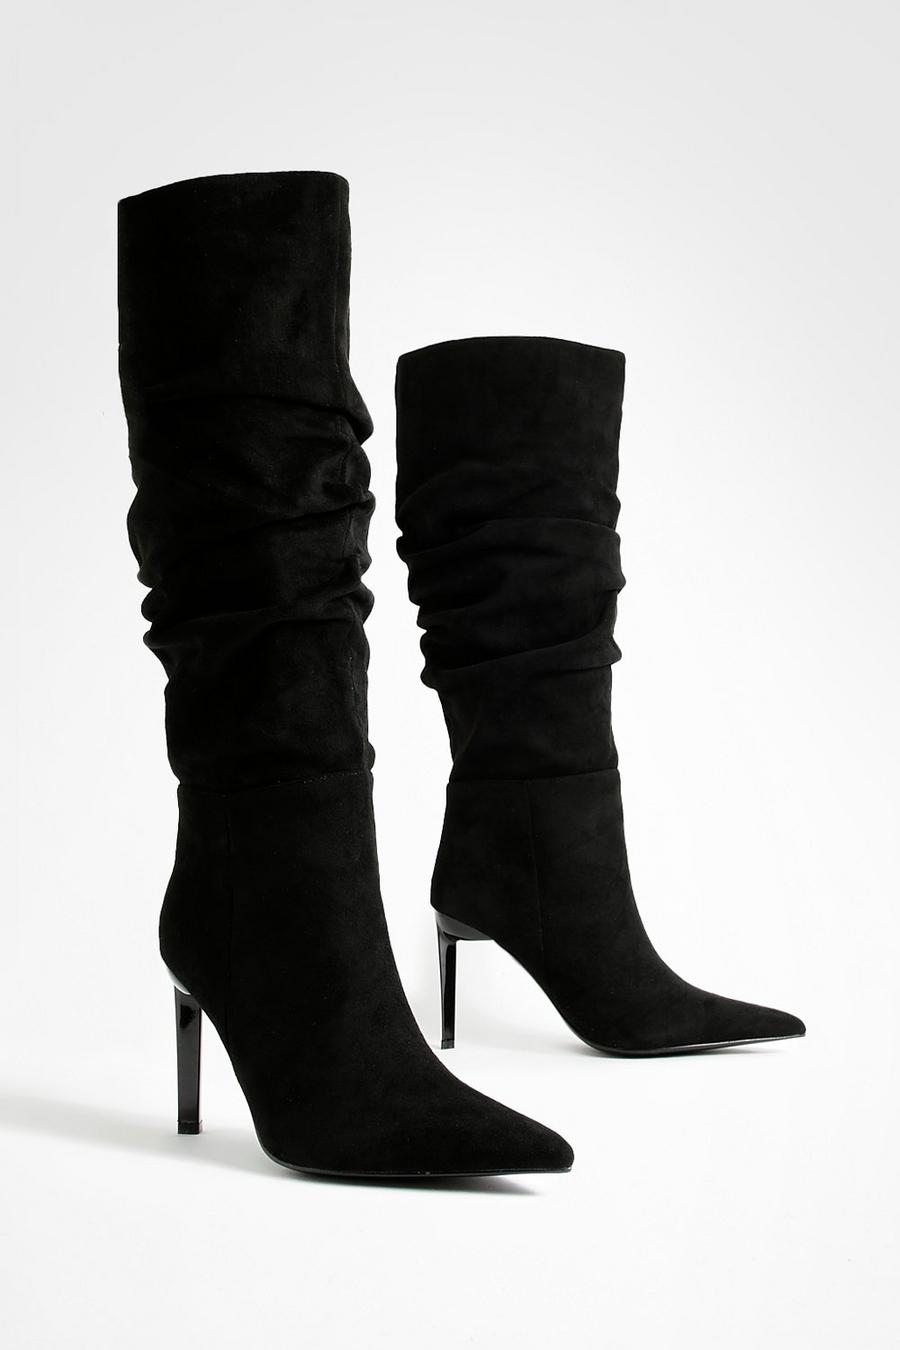 Black Ruched Stiletto Pointed Toe Boots